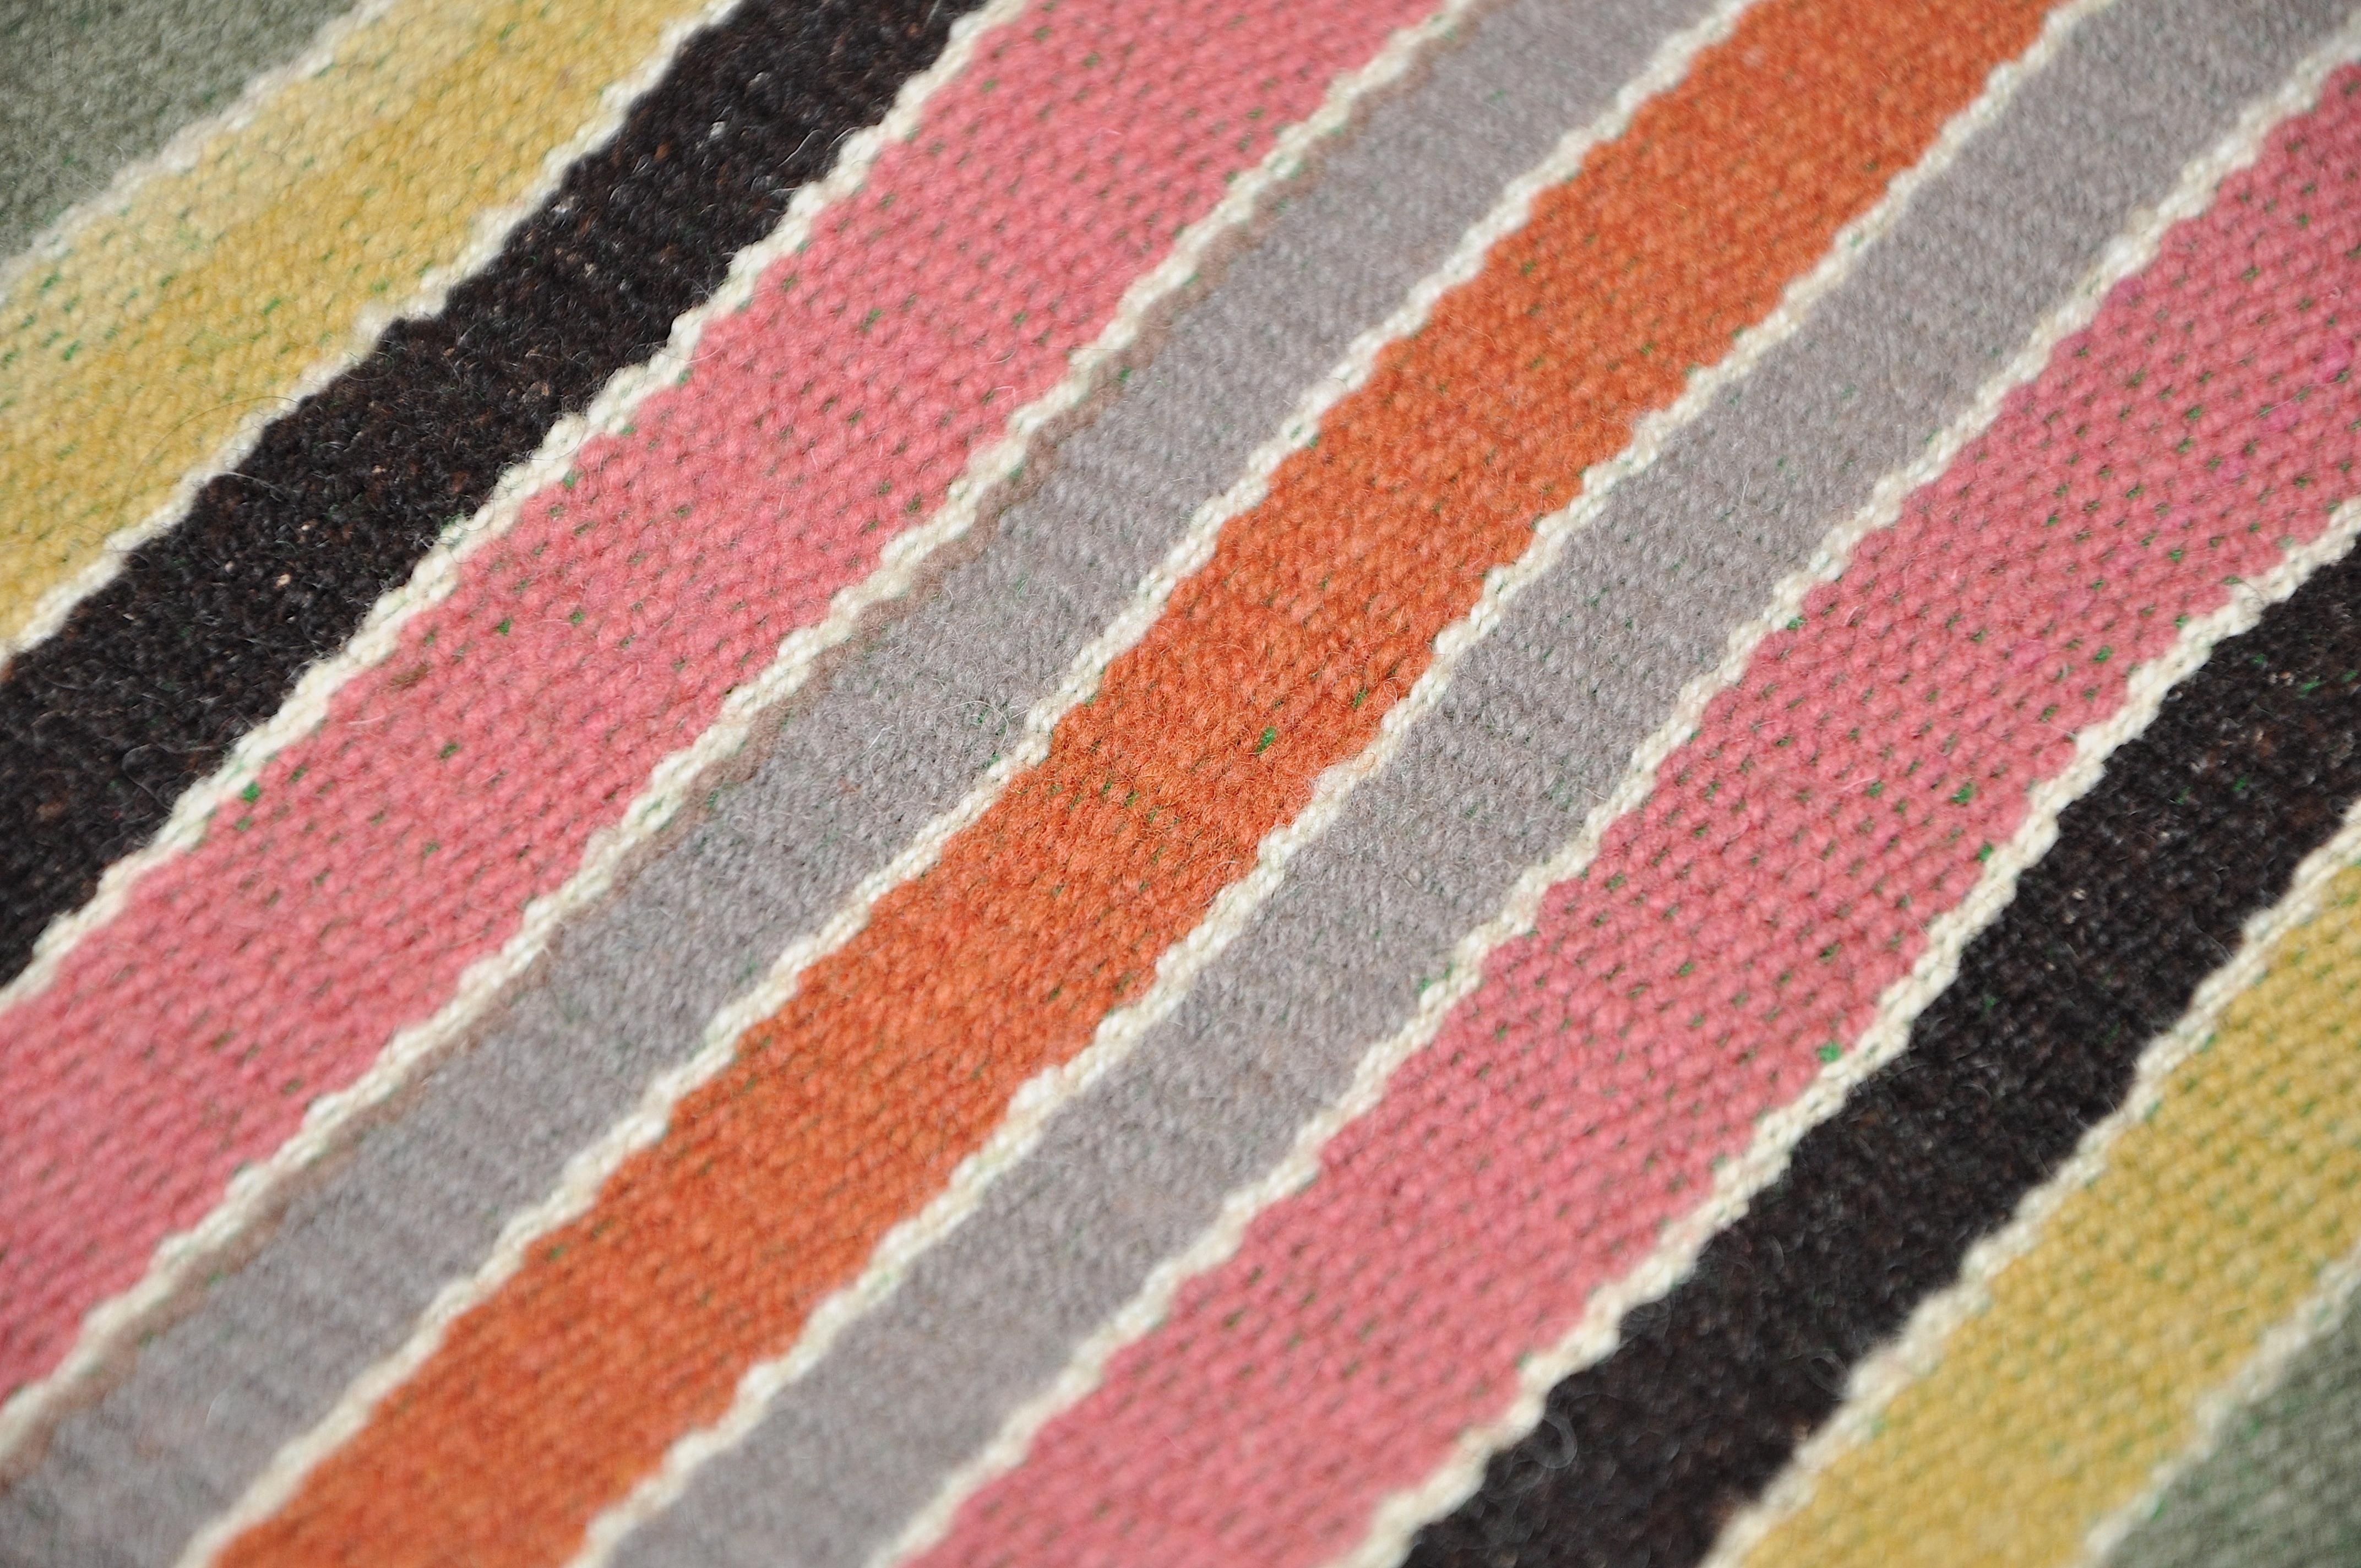 Unknown Vintage Multi-Color Ethnic Place Matts from Peru For Sale